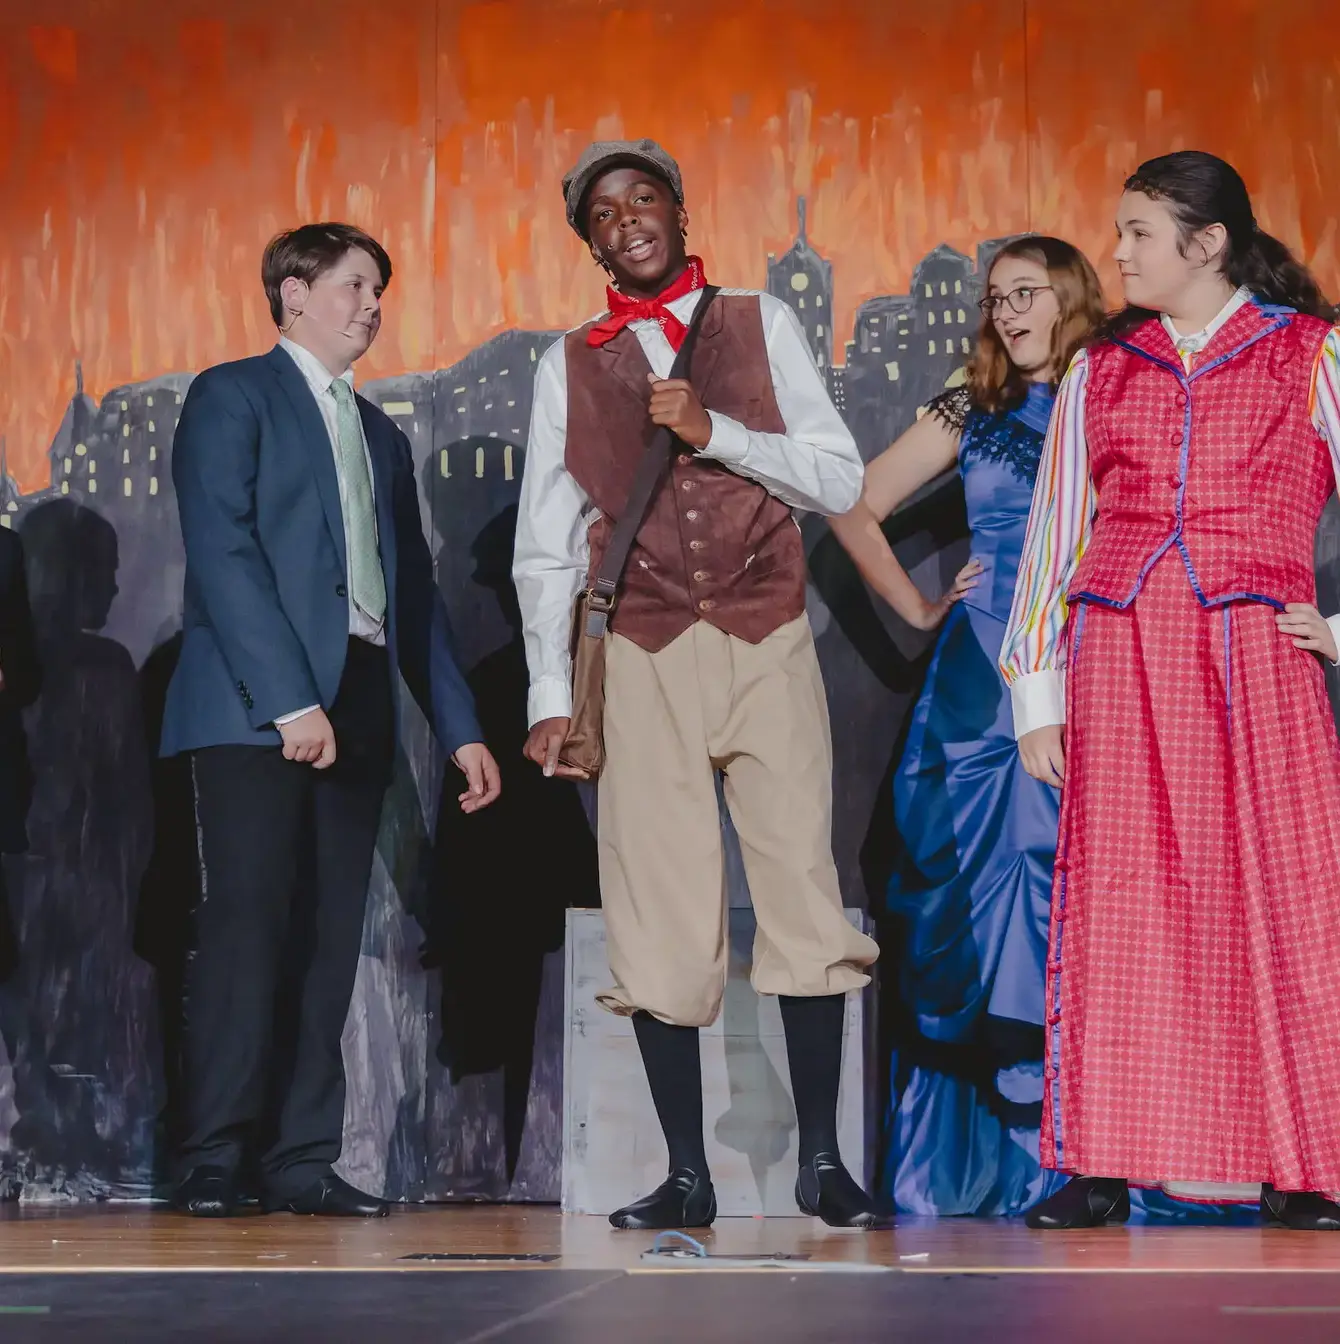 A lively scene from a middle school theater production with students in vibrant period costumes performing on stage, depicting a moment from the musical 'Newsies Jr'.